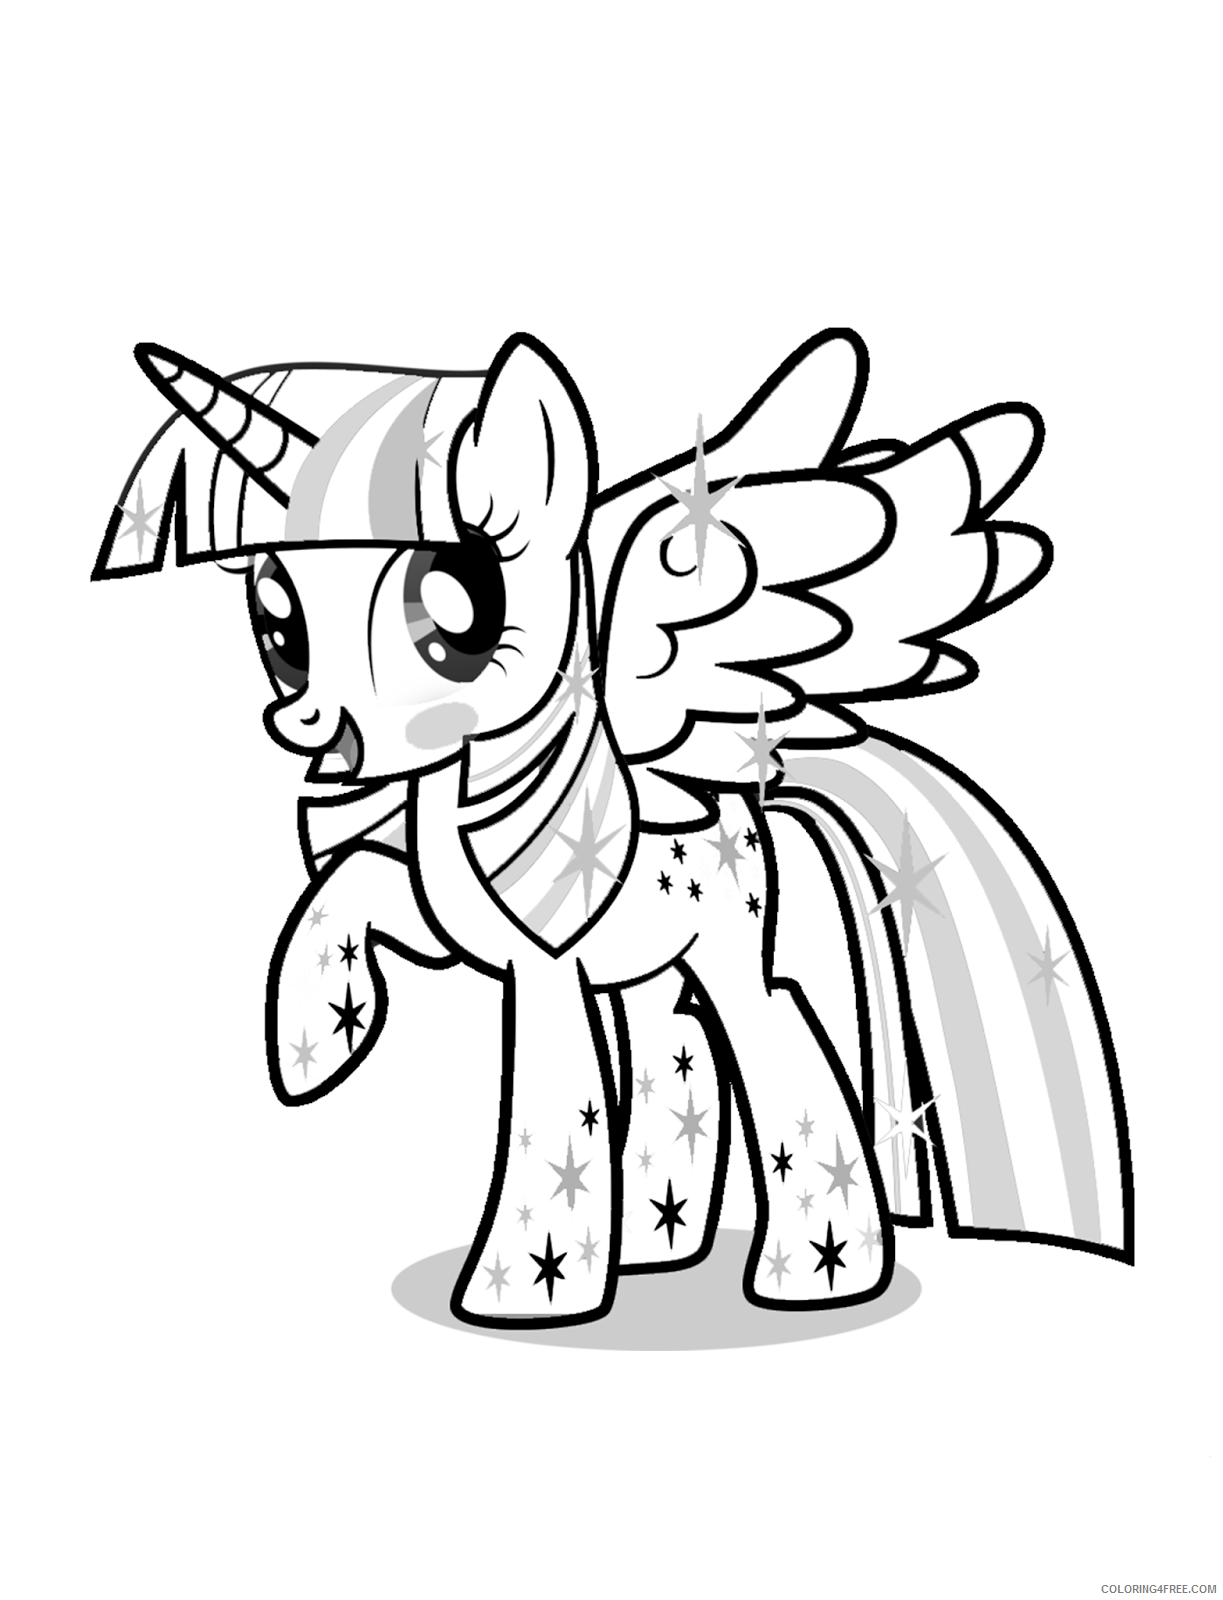 Twilight Sparkle Coloring Pages Twilight Sparkle Printable 2021 6001 Coloring4free